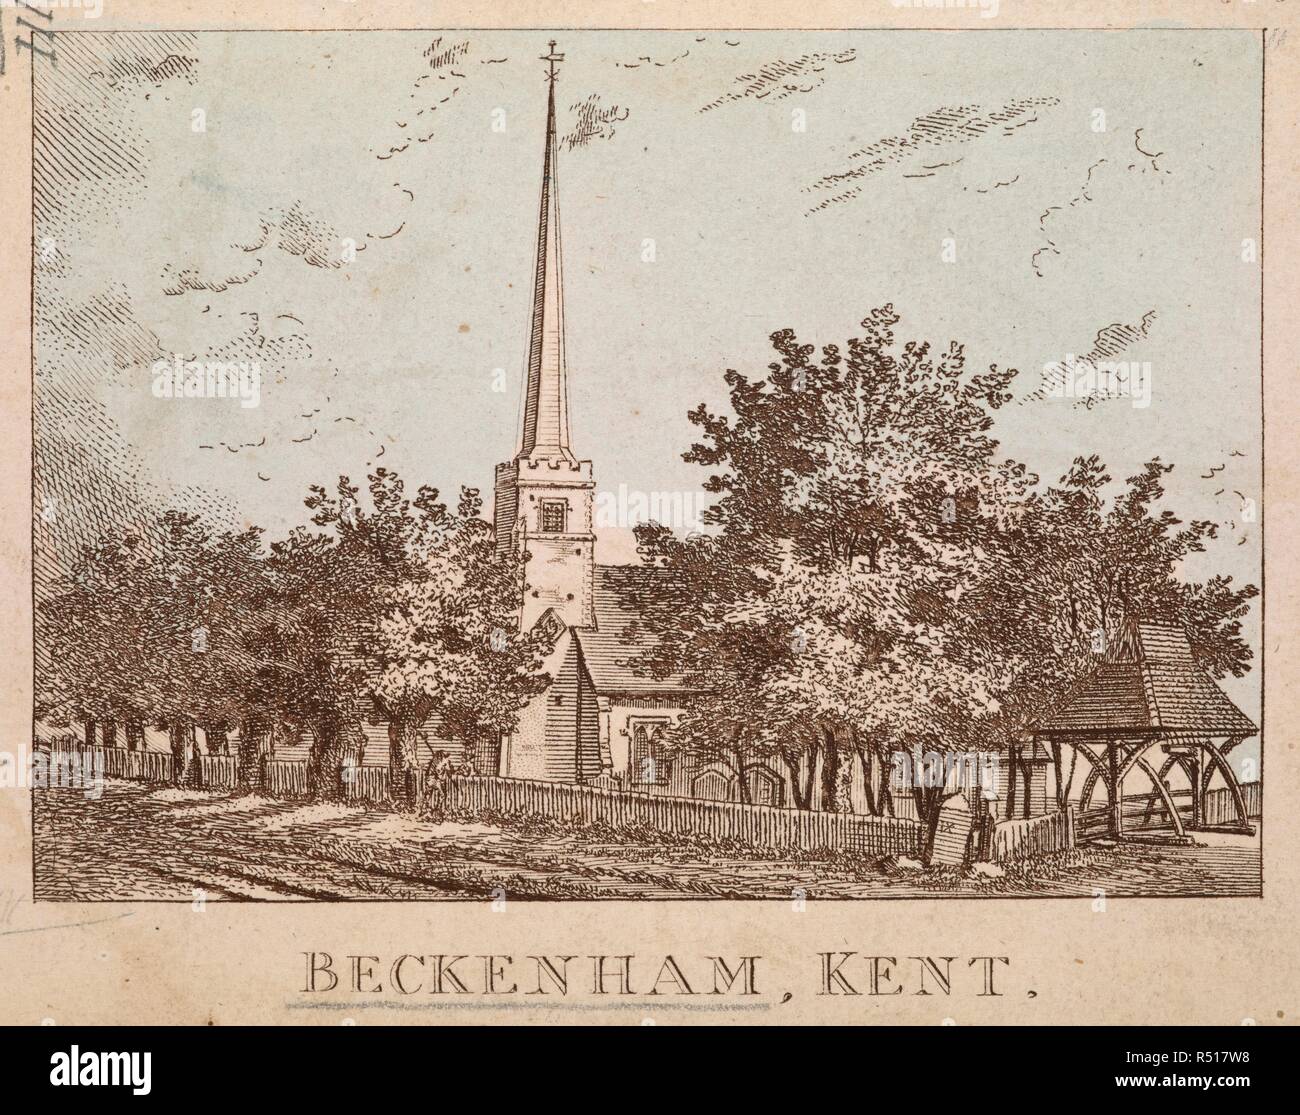 A view of a church, possibly St. George's before it was rebuilt, in Beckenham; trees in front . BECKENHAM, KENT. [London] : [Drawn & Etch'd by I. T. Smith & Pubd. April 5, 1793 by Nathl. Smith Ancient Printseller Rembrandts Head Gt. Mays Buildings, St. Martins Lane, London - Where may be seen an extensive Collection of English Portraits arranged in Alphabetical order, likewise Etchings by & from all Masters], [April 5 1793]. Etching with blue wash. Source: Maps K.Top.18.4.a. Language: English. Stock Photo